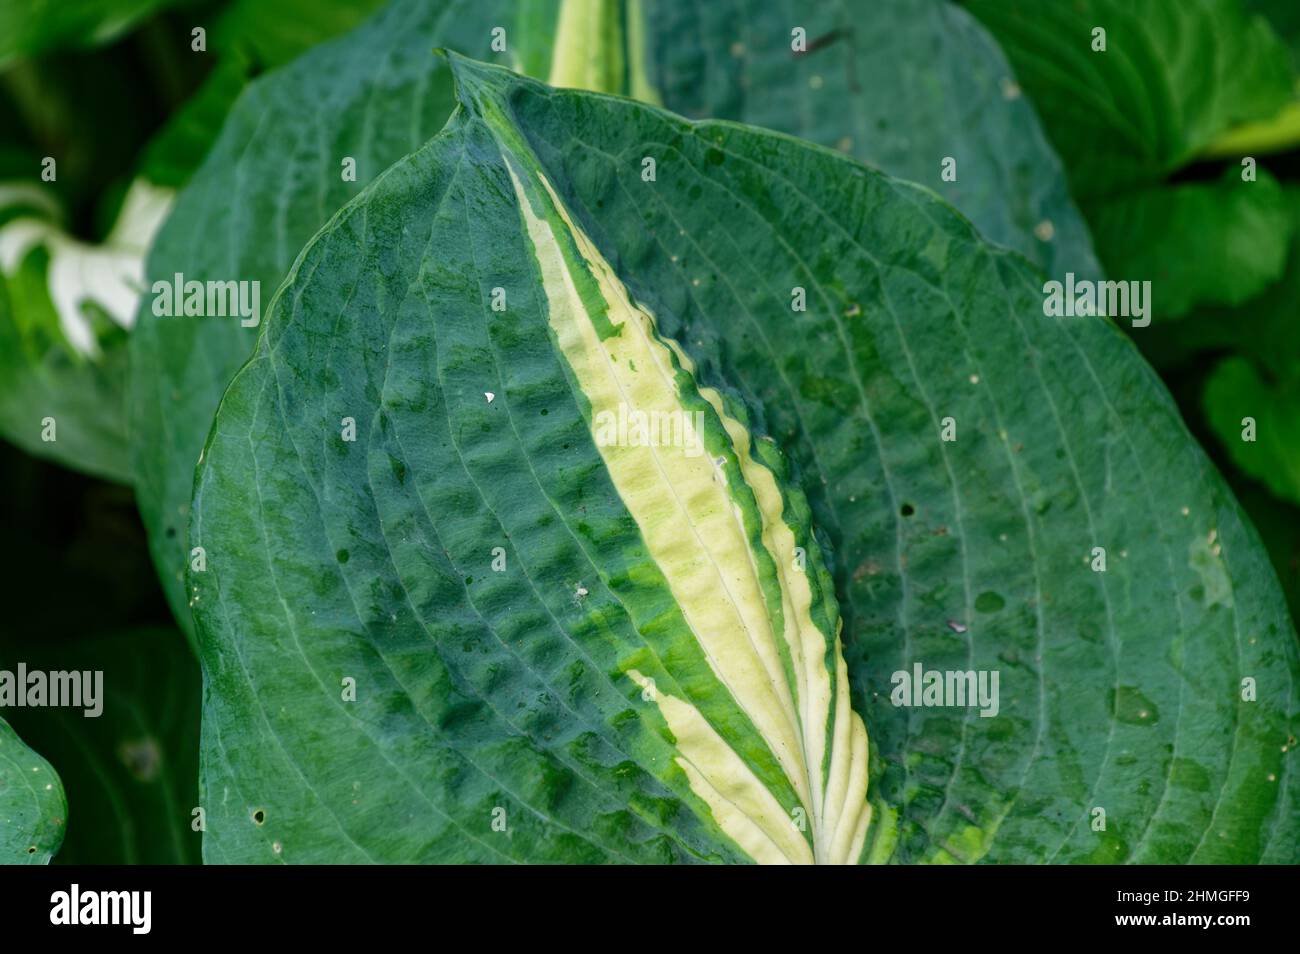 A hosta leaf has some rain spots on it, yellow merges into green. Stock Photo